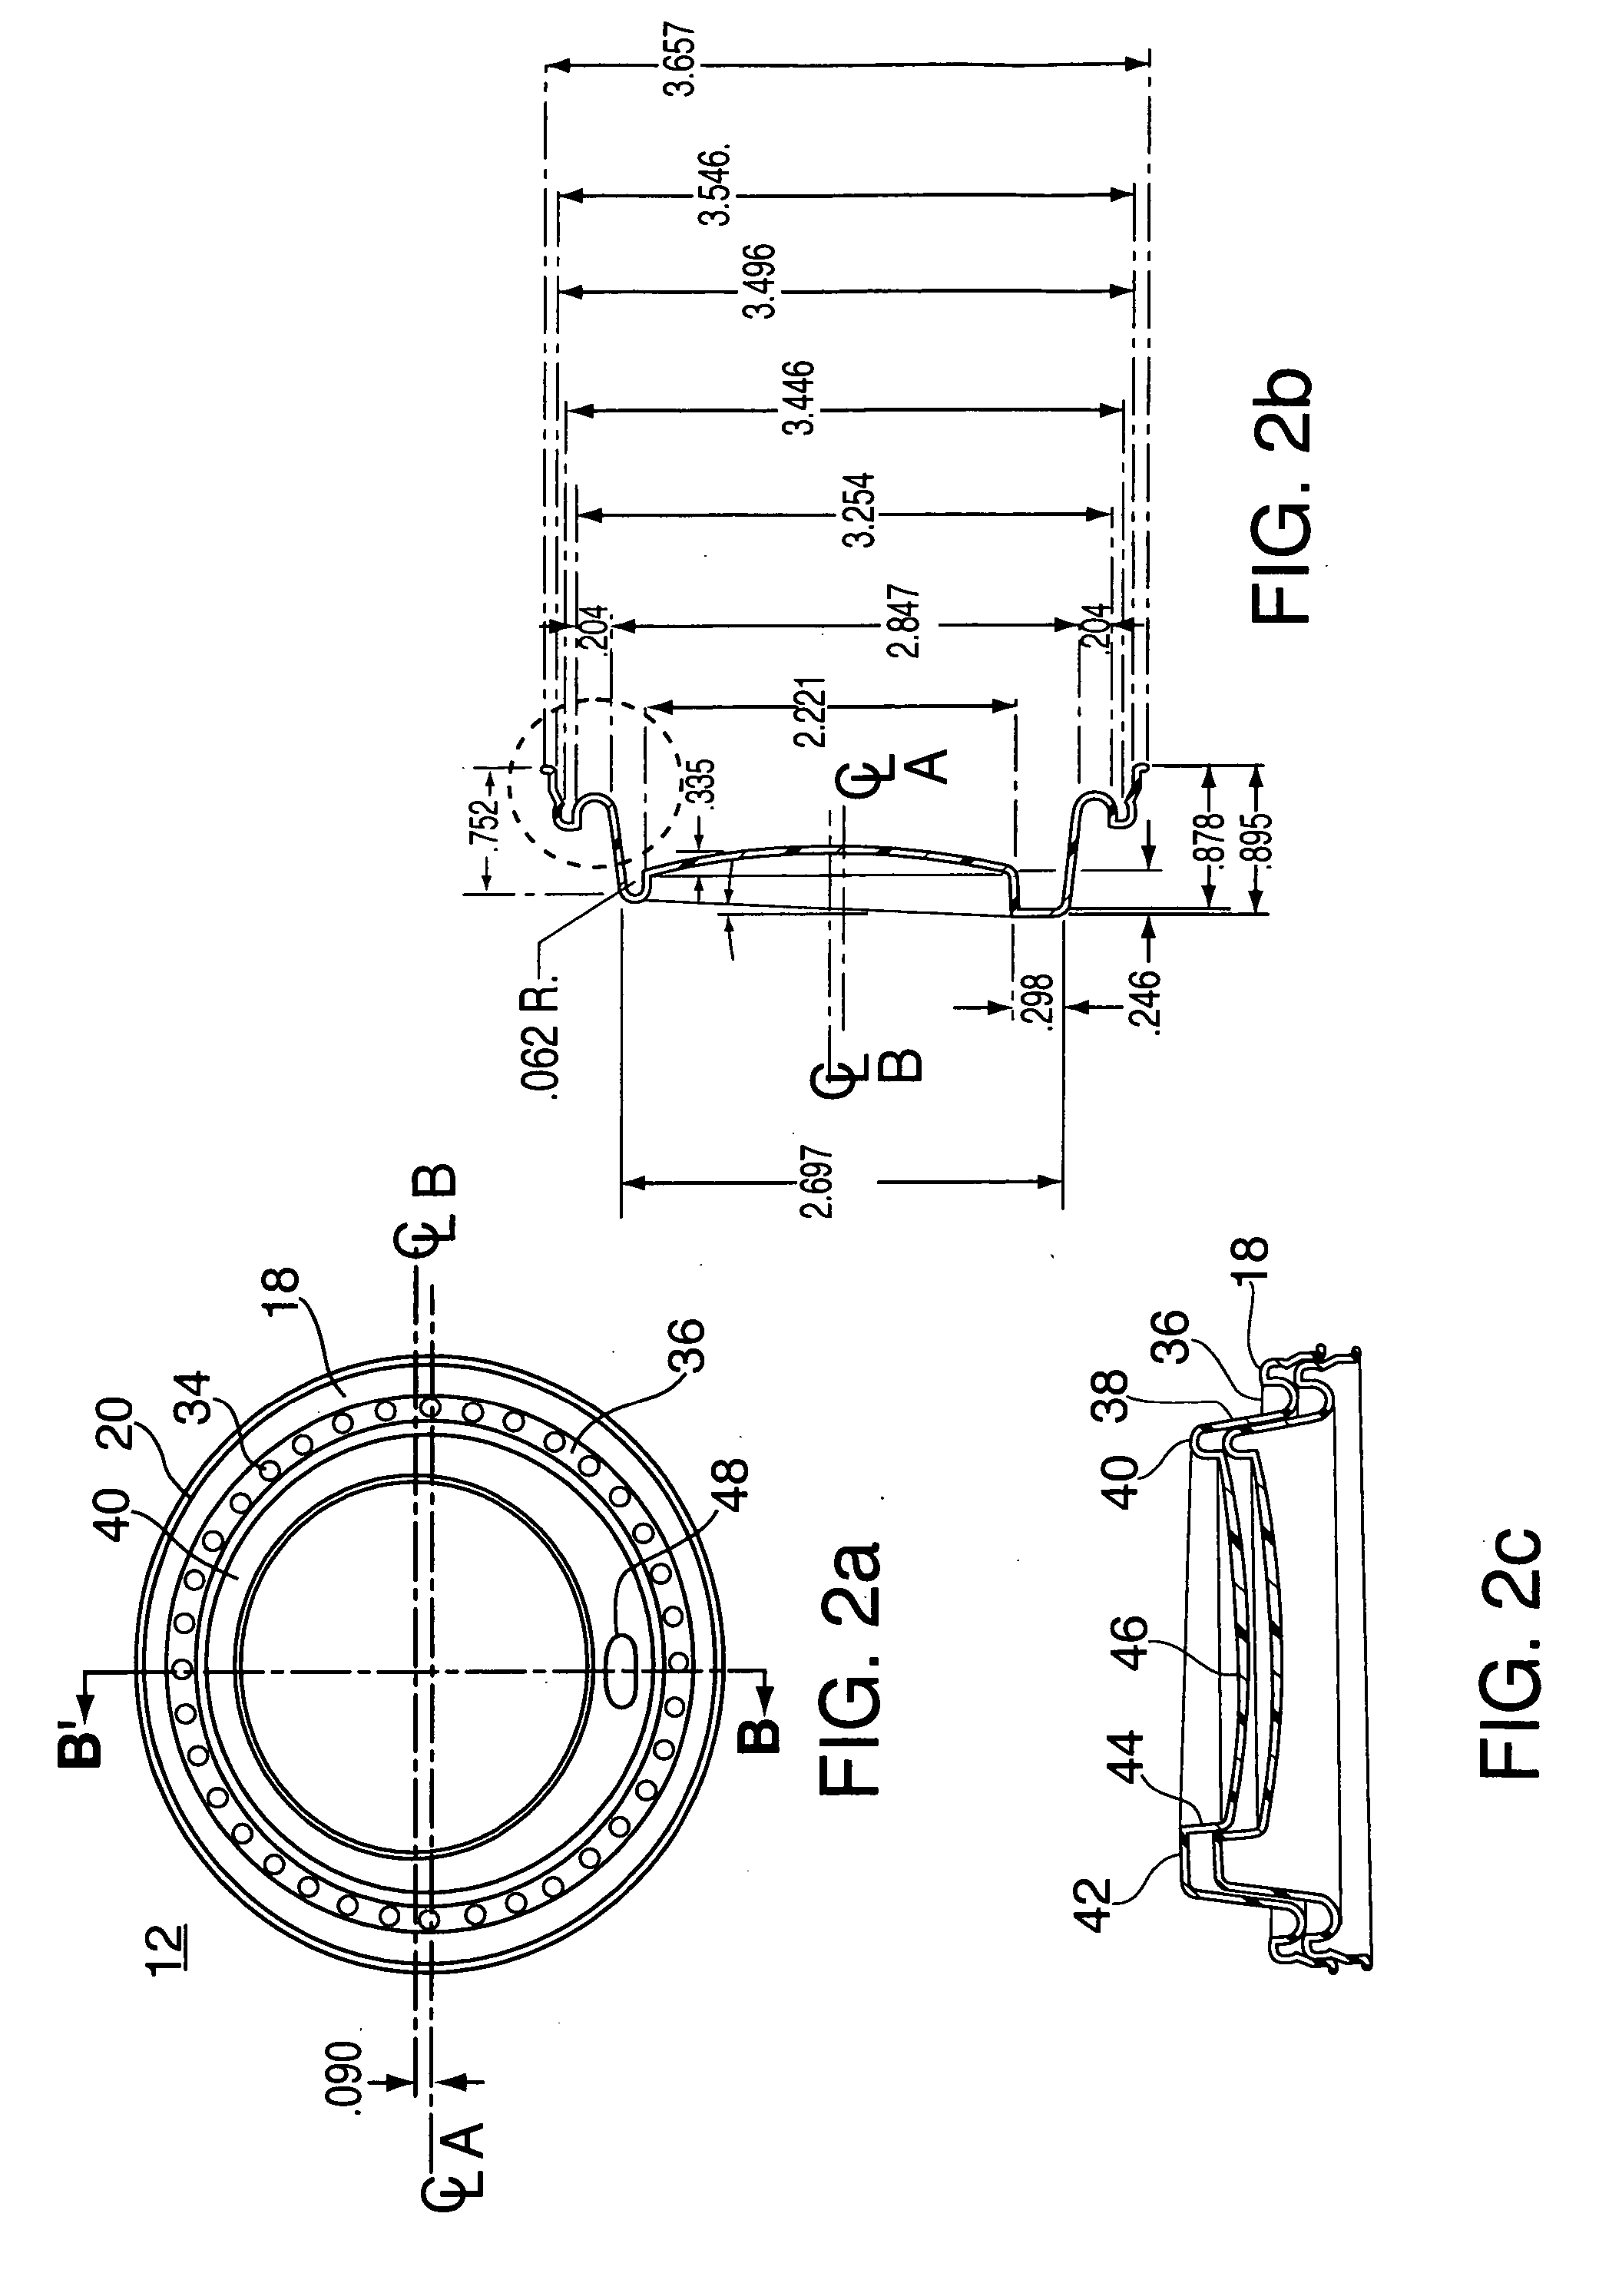 Leak resistant lid assembly for a beverage container